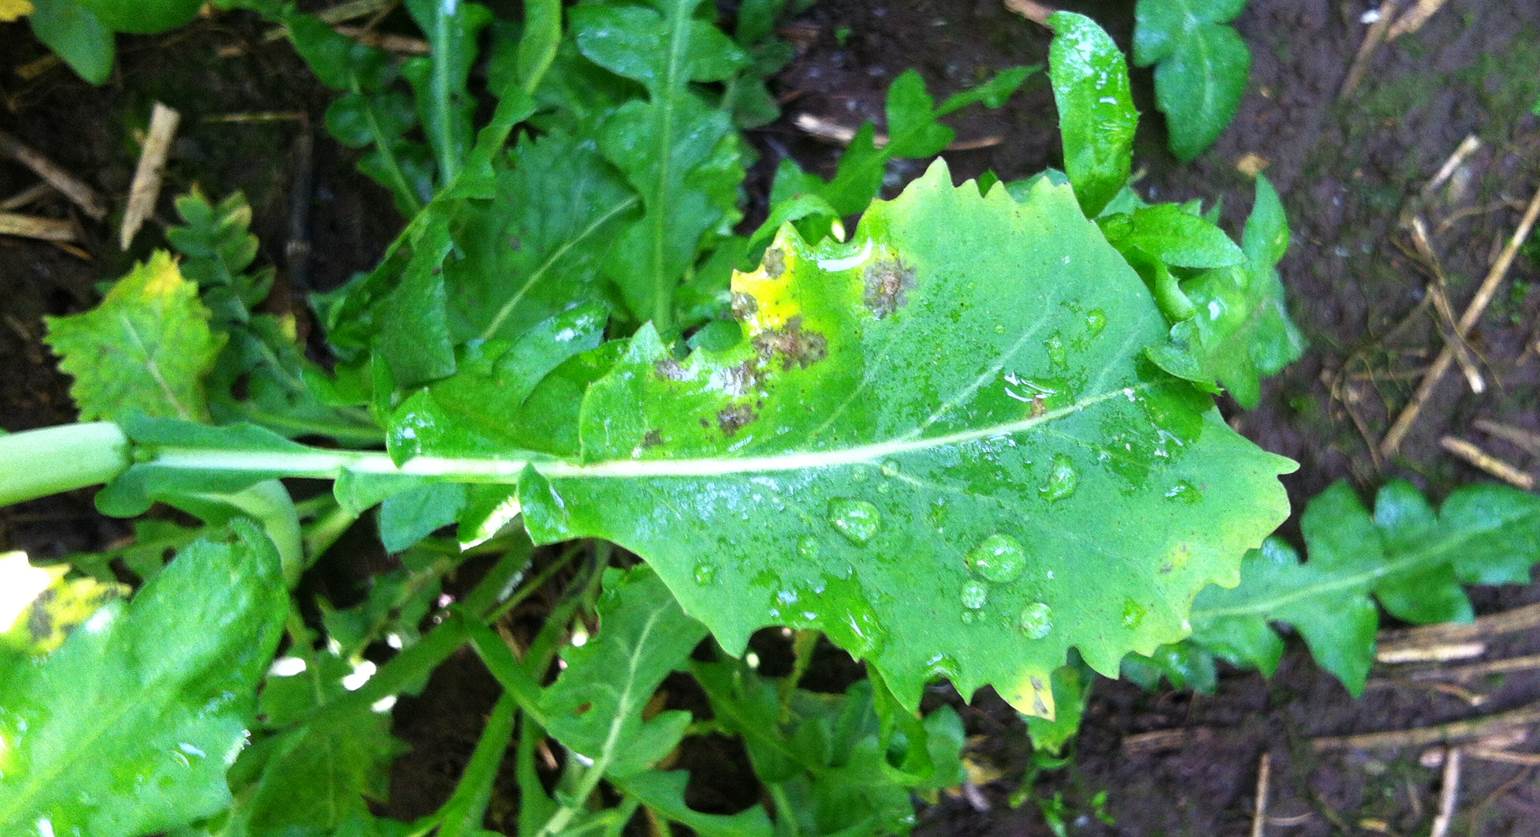 Light leaf spot is the most damaging disease to crops in Scotland and in recent years is increasingly being identified as a serious problem in England